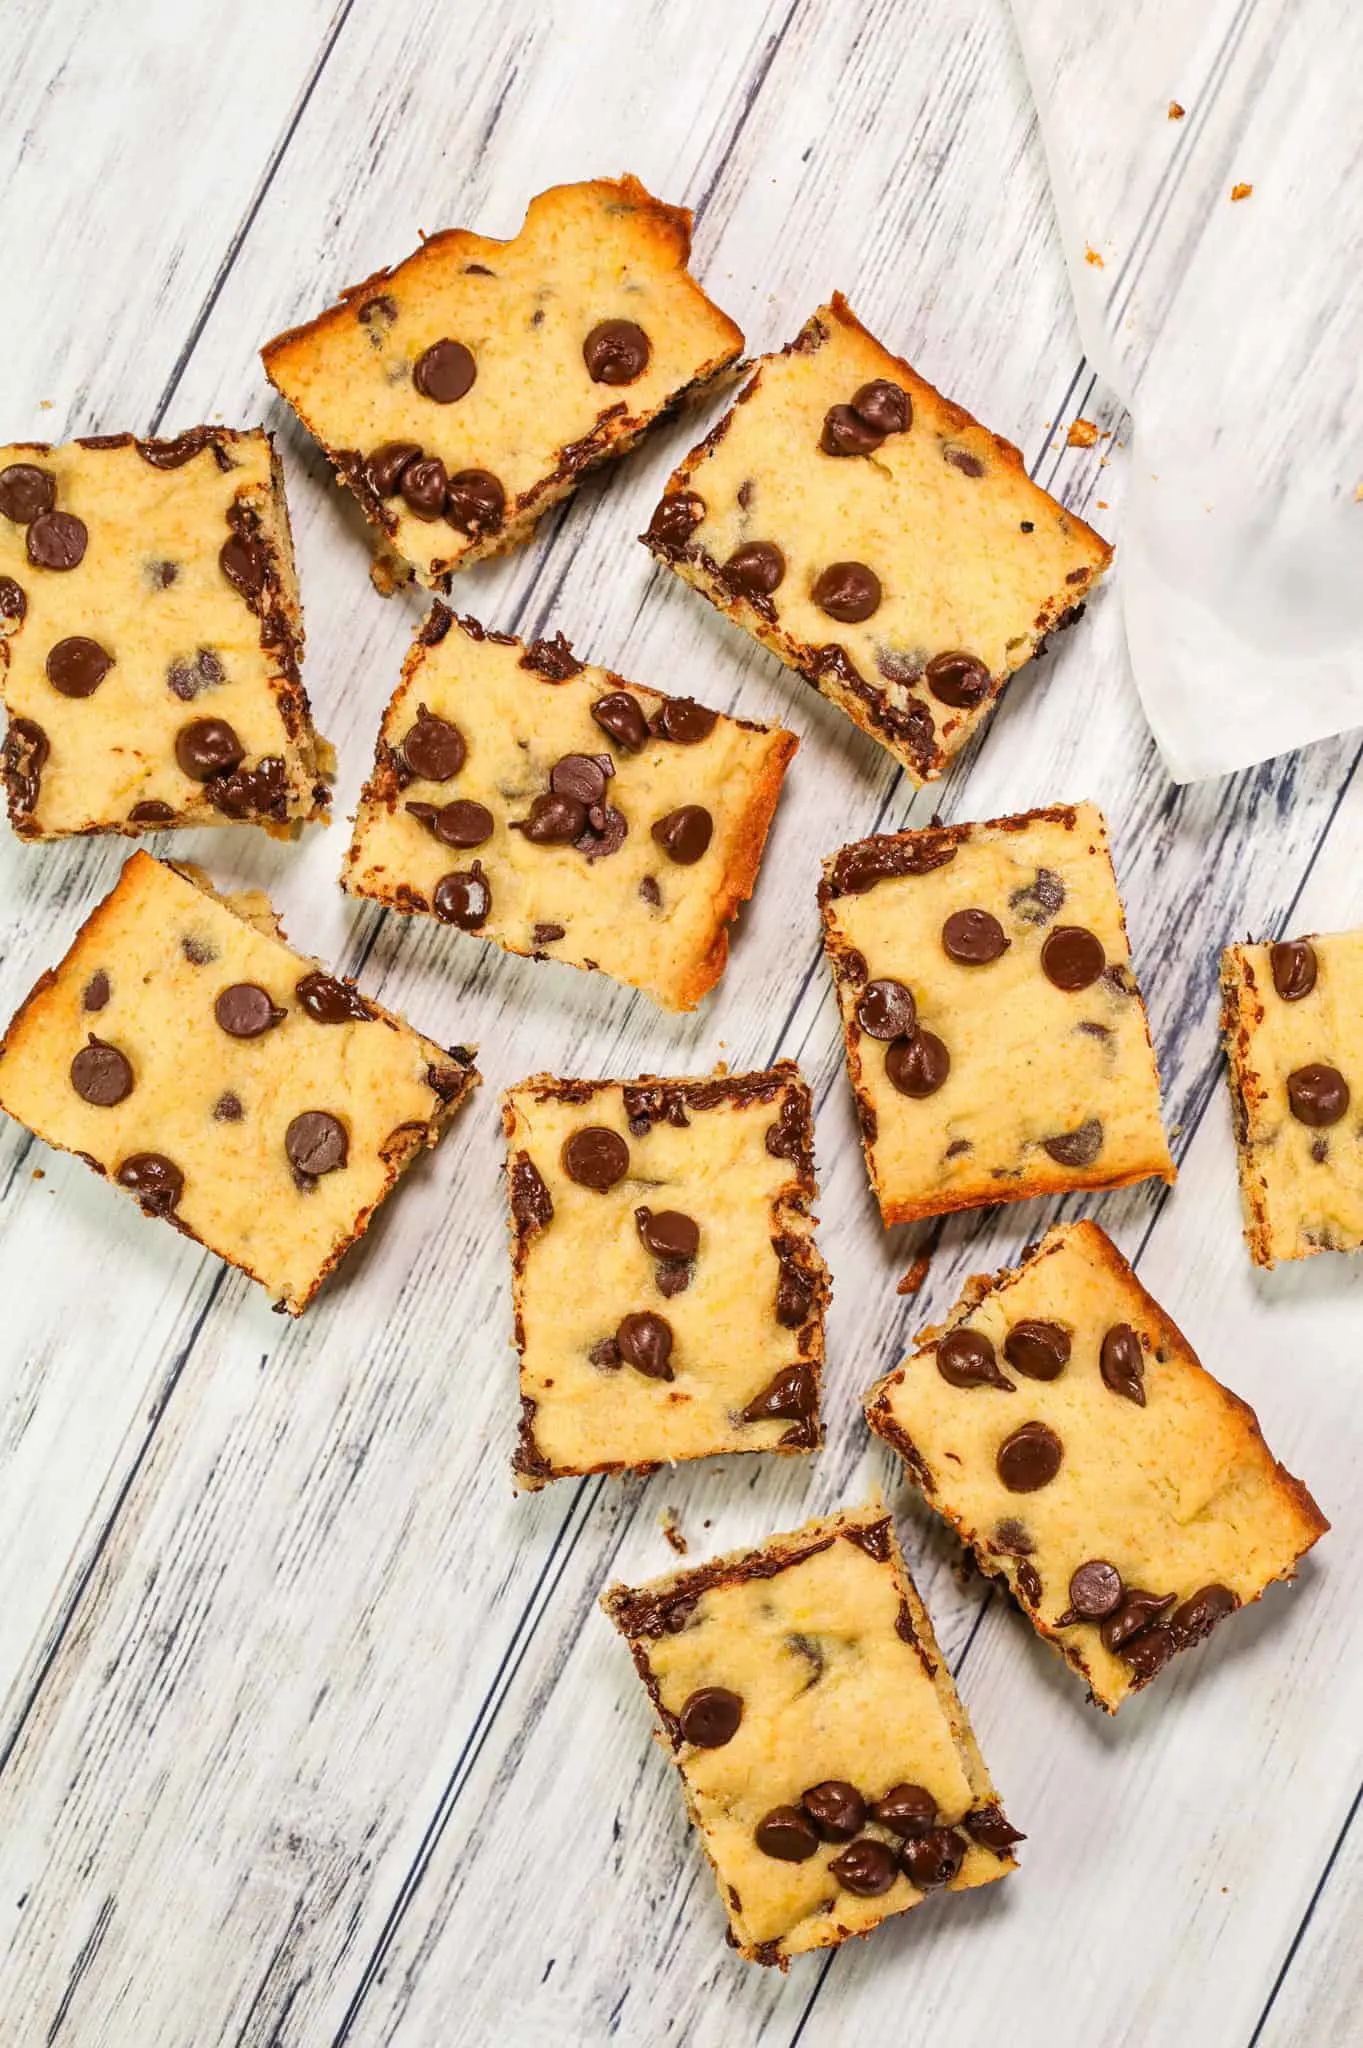 Banana Chocolate Chip Bars are an easy dessert recipe made with ripe bananas and loaded with semi sweet chocolate chips.